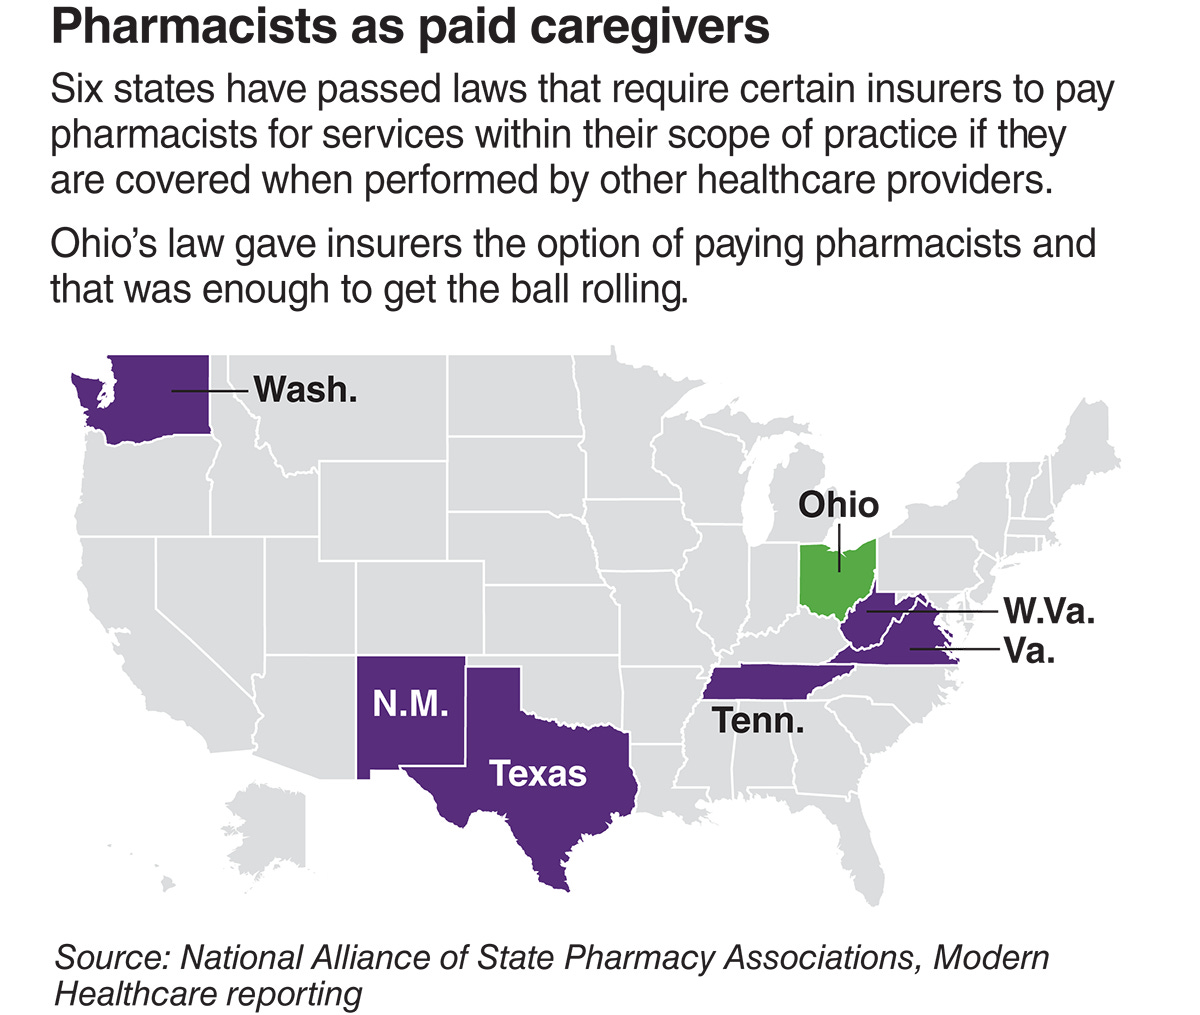 States where pharmacists are paid as caregivers